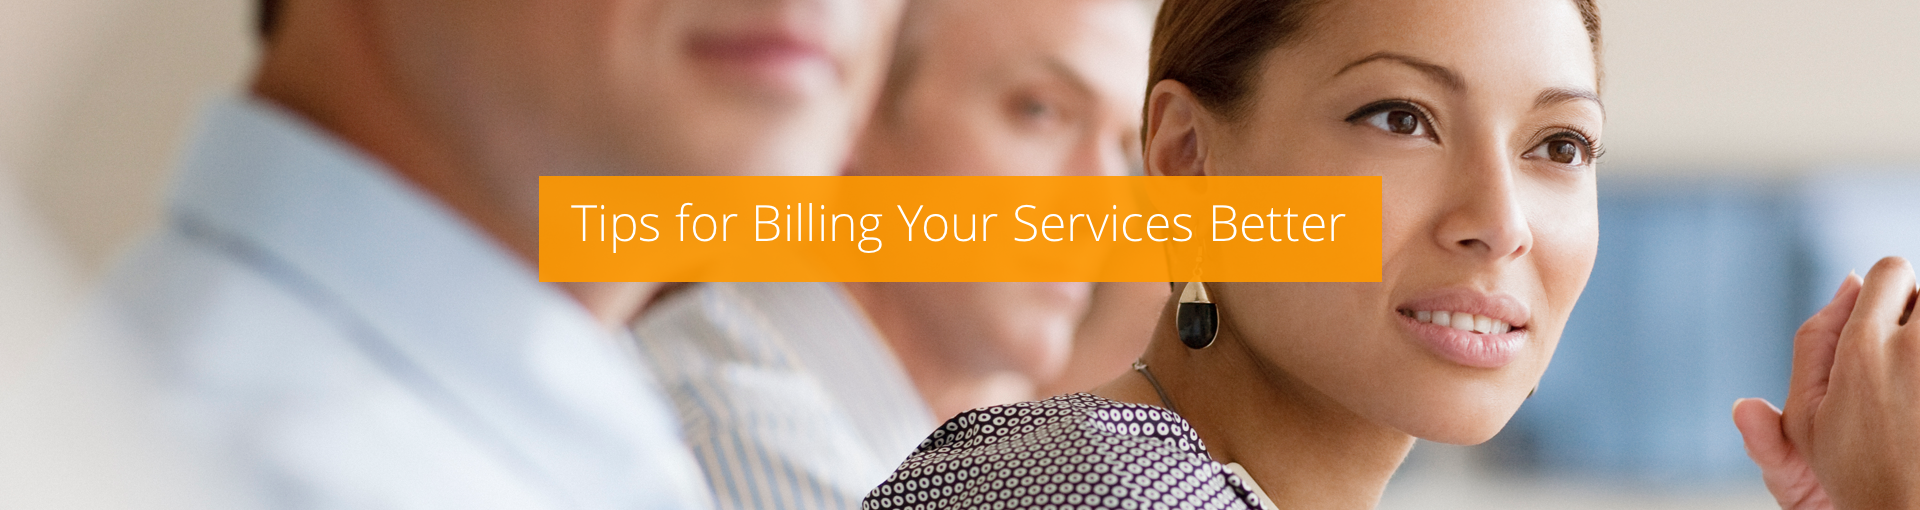 Tips for Billing Your Services Better